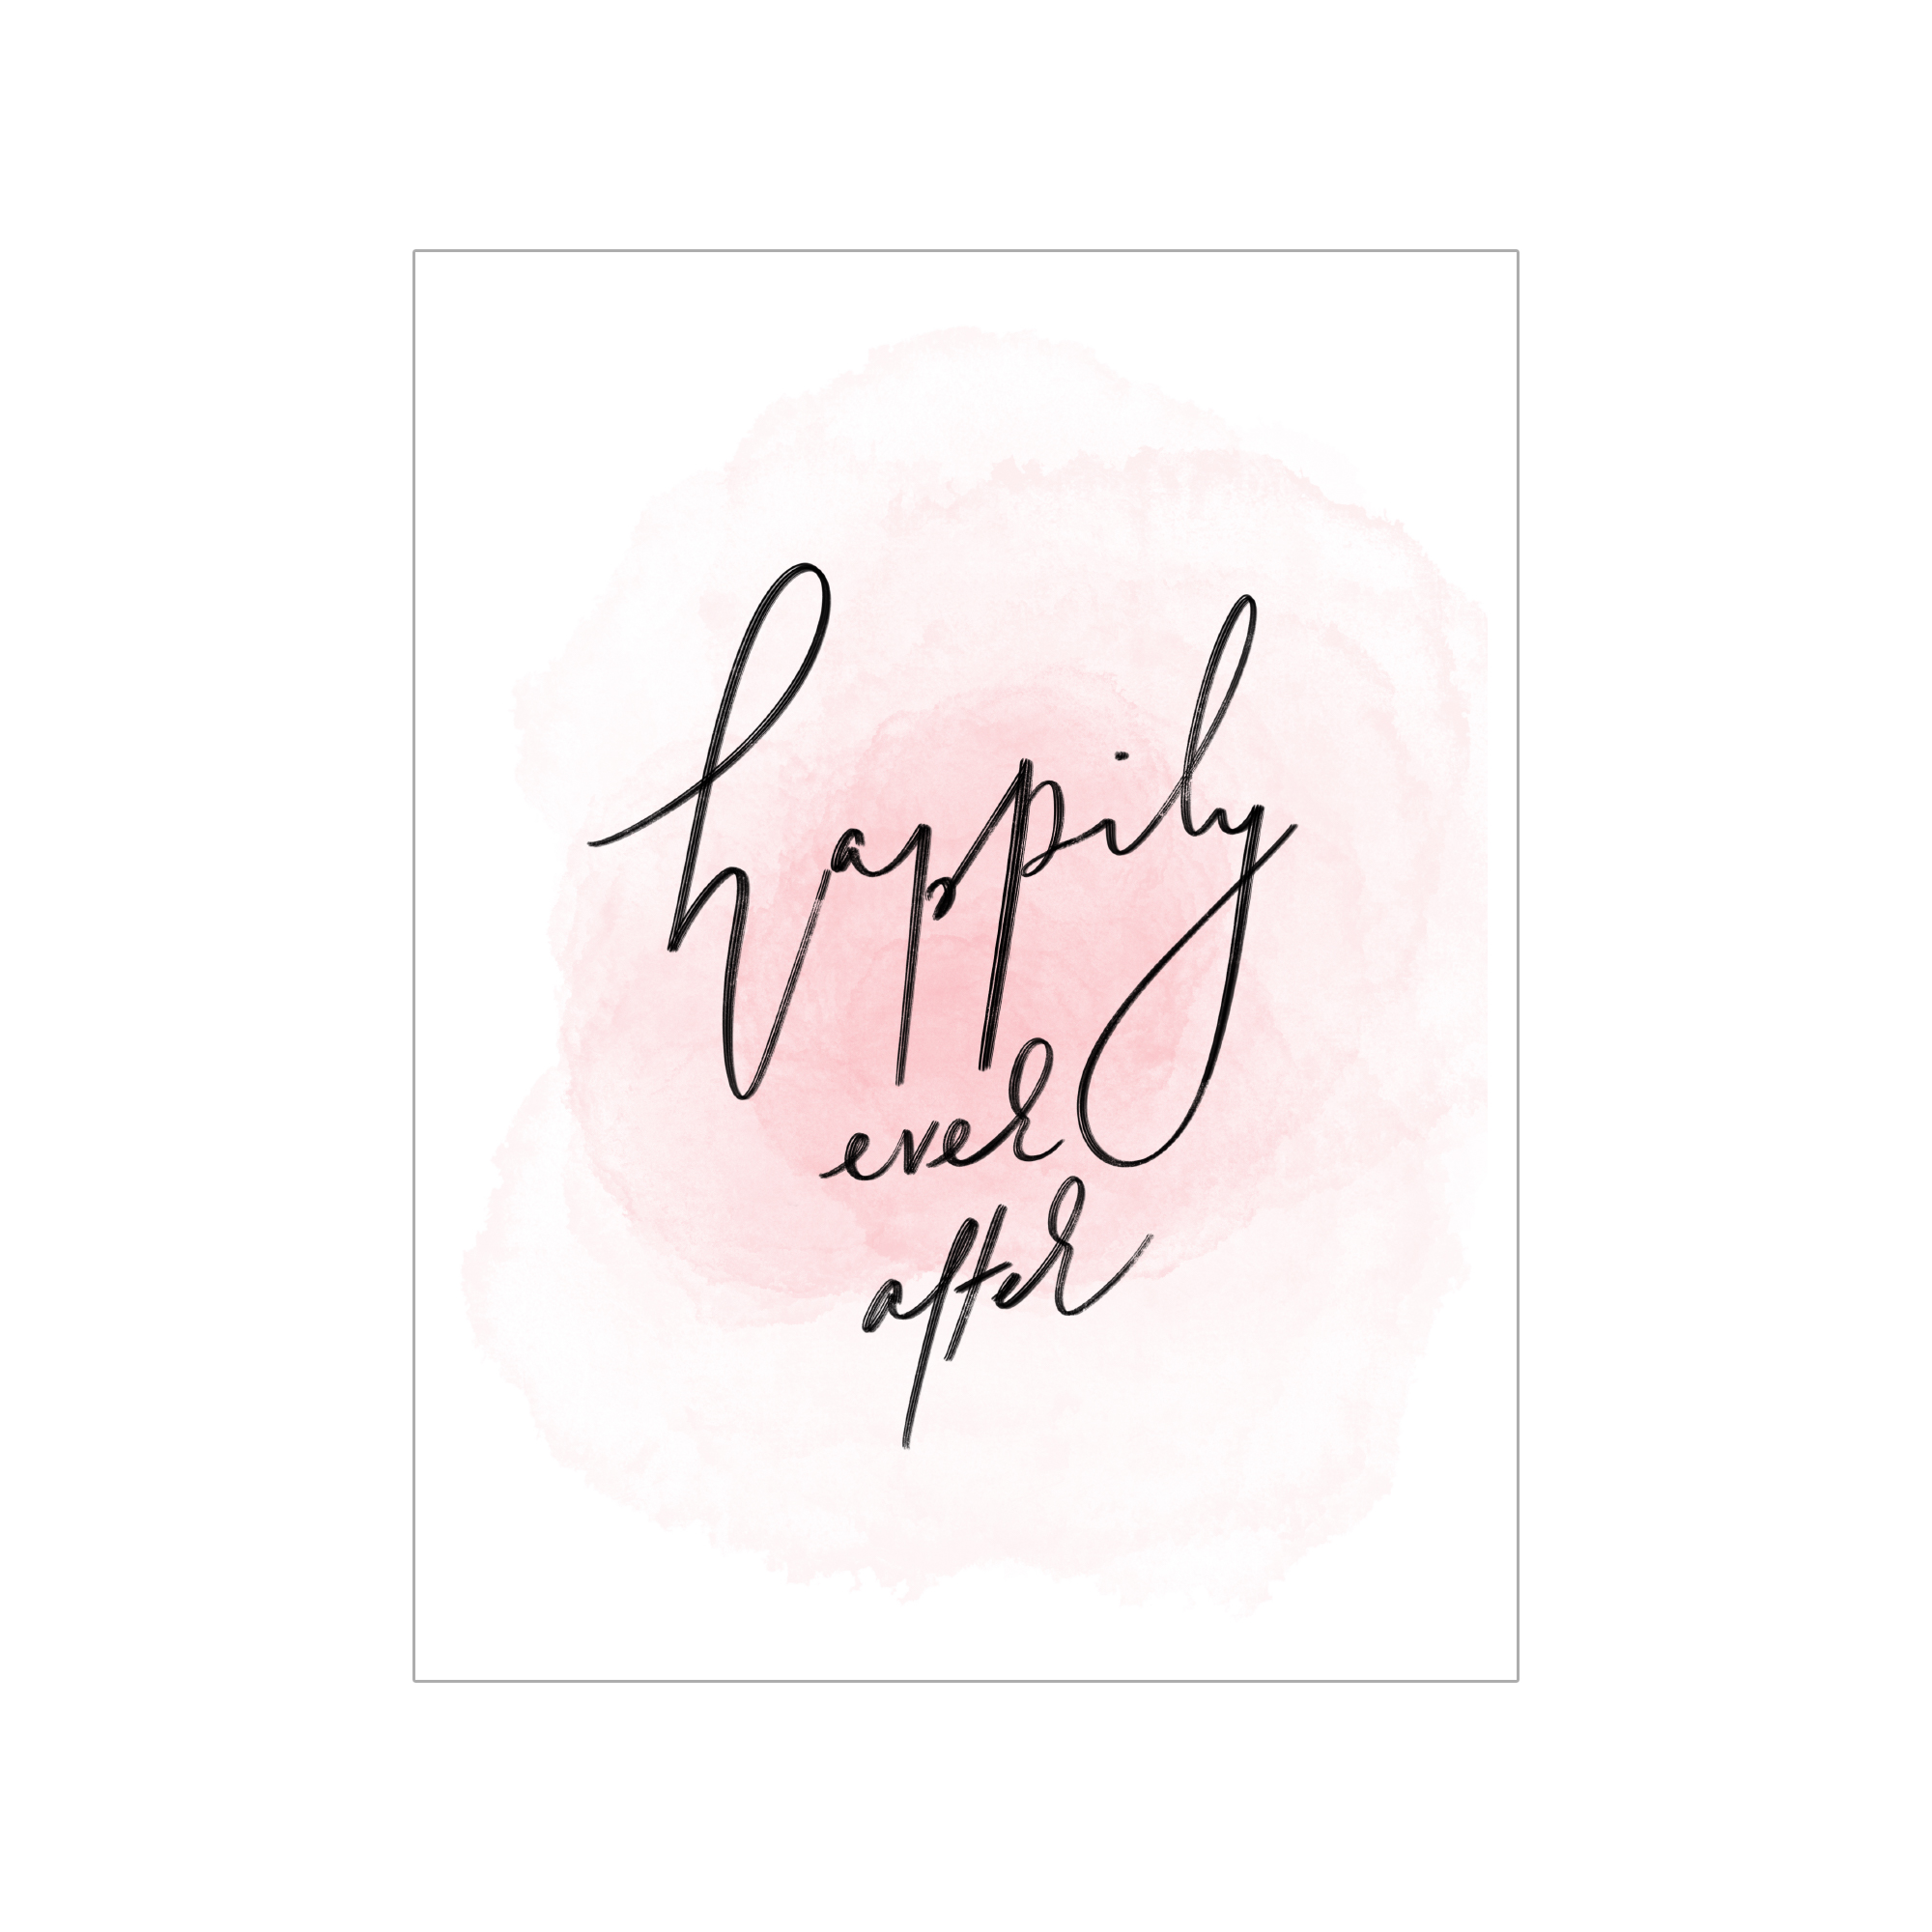 Greeting card; white and pink watercolour background with black handwritten text, "happily ever after"